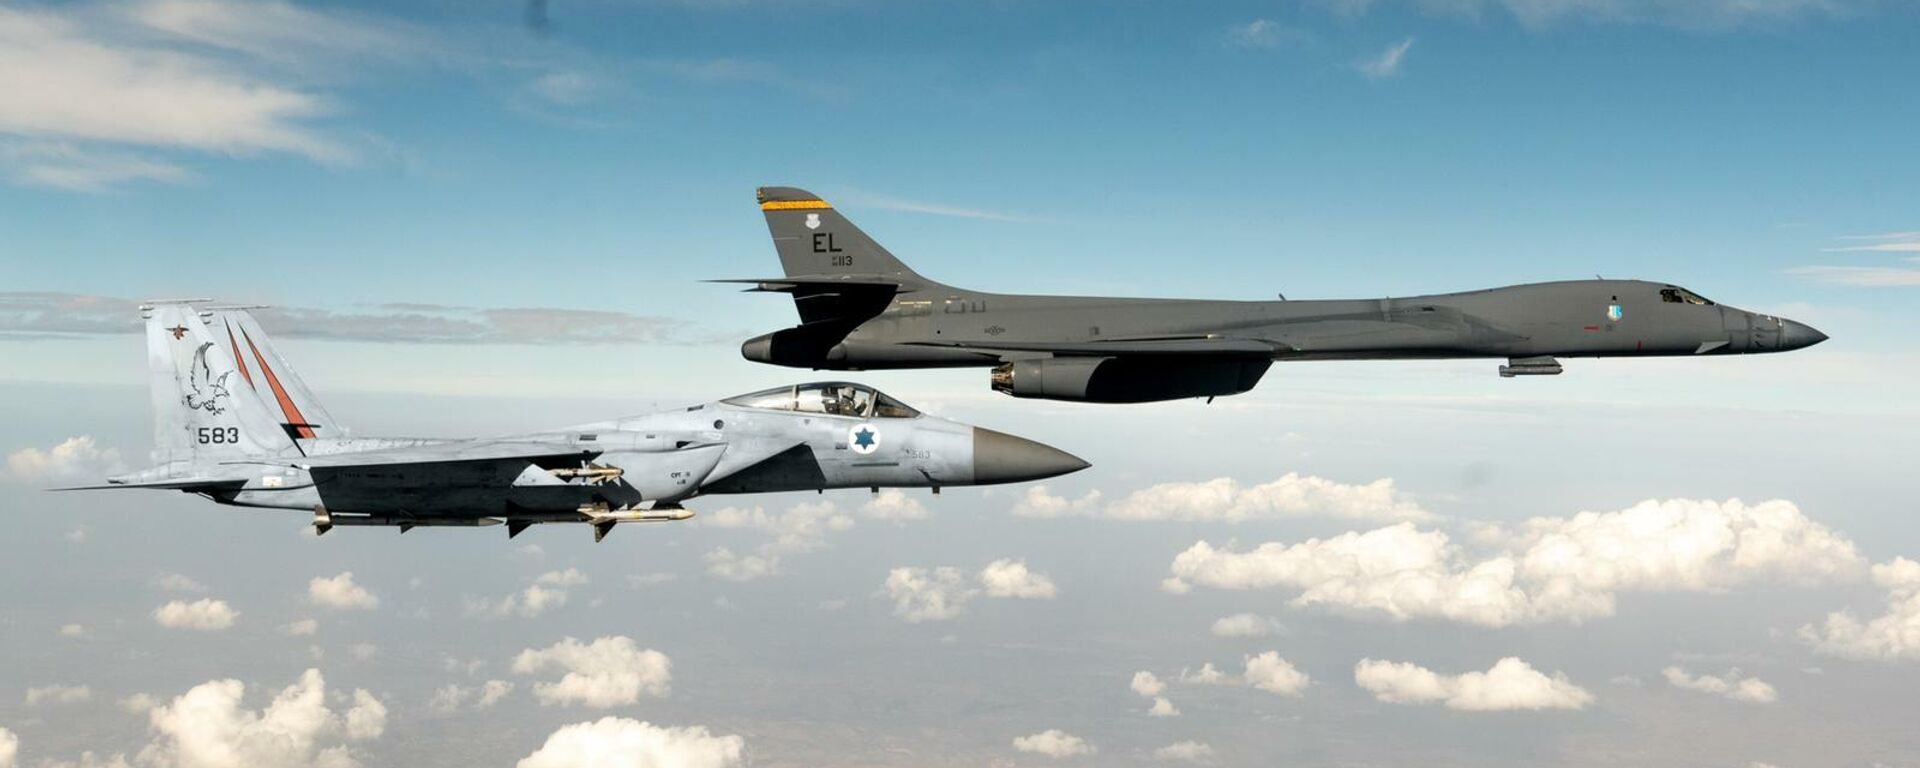 IDF says F-15 fighter jets escorted a US B-1 bomber over Israel's skies towards the Gulf on October 30, 2021. - Sputnik International, 1920, 30.08.2023